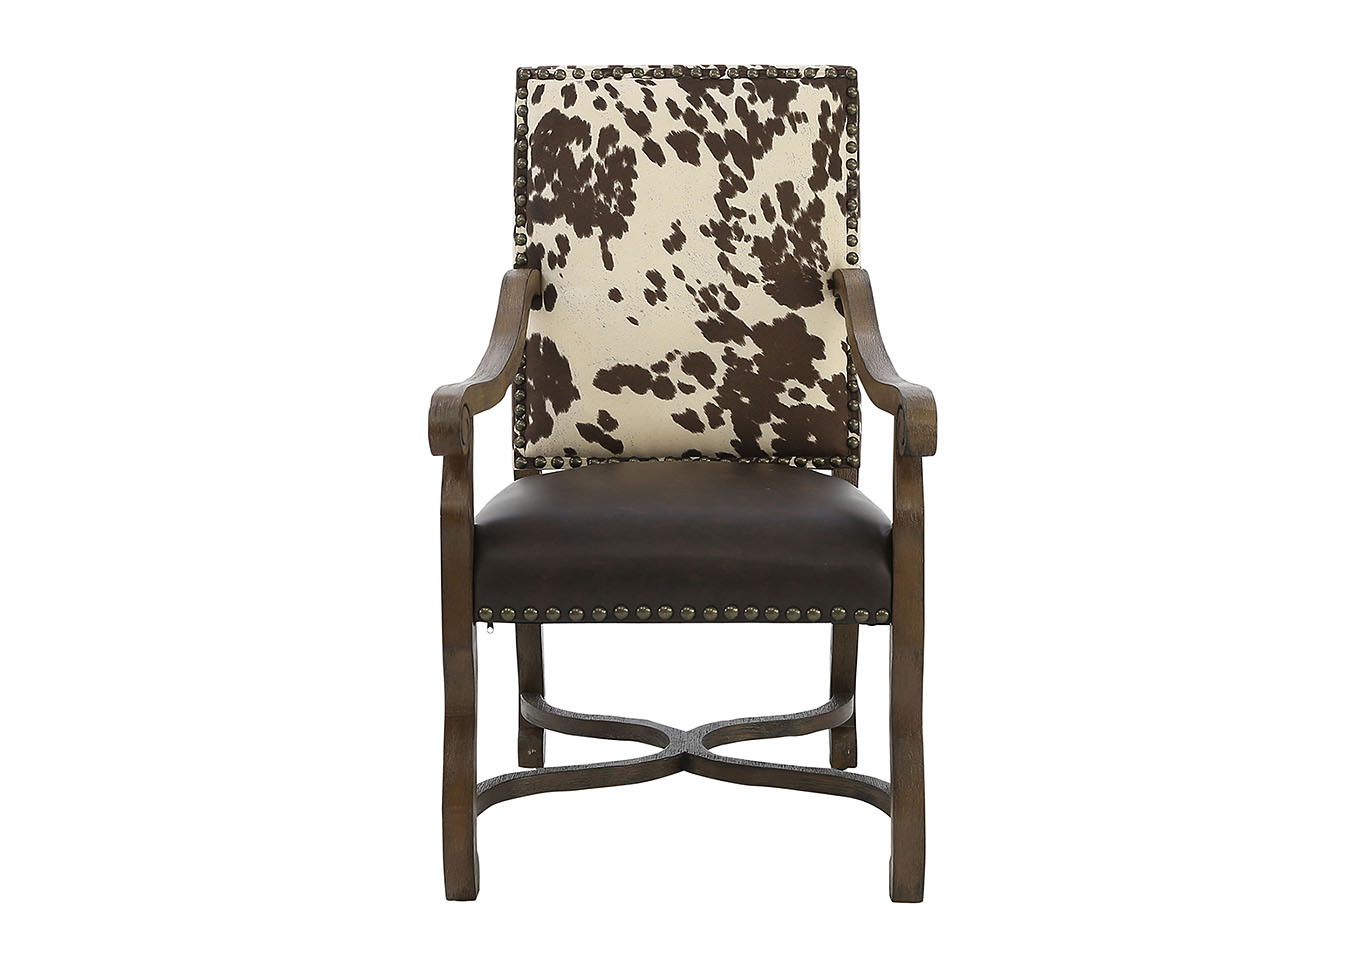 MESQUITE RANCH LEATHER/FAUX COWHIDE ARMCHAIR,CRESTVIEW COLLECTION